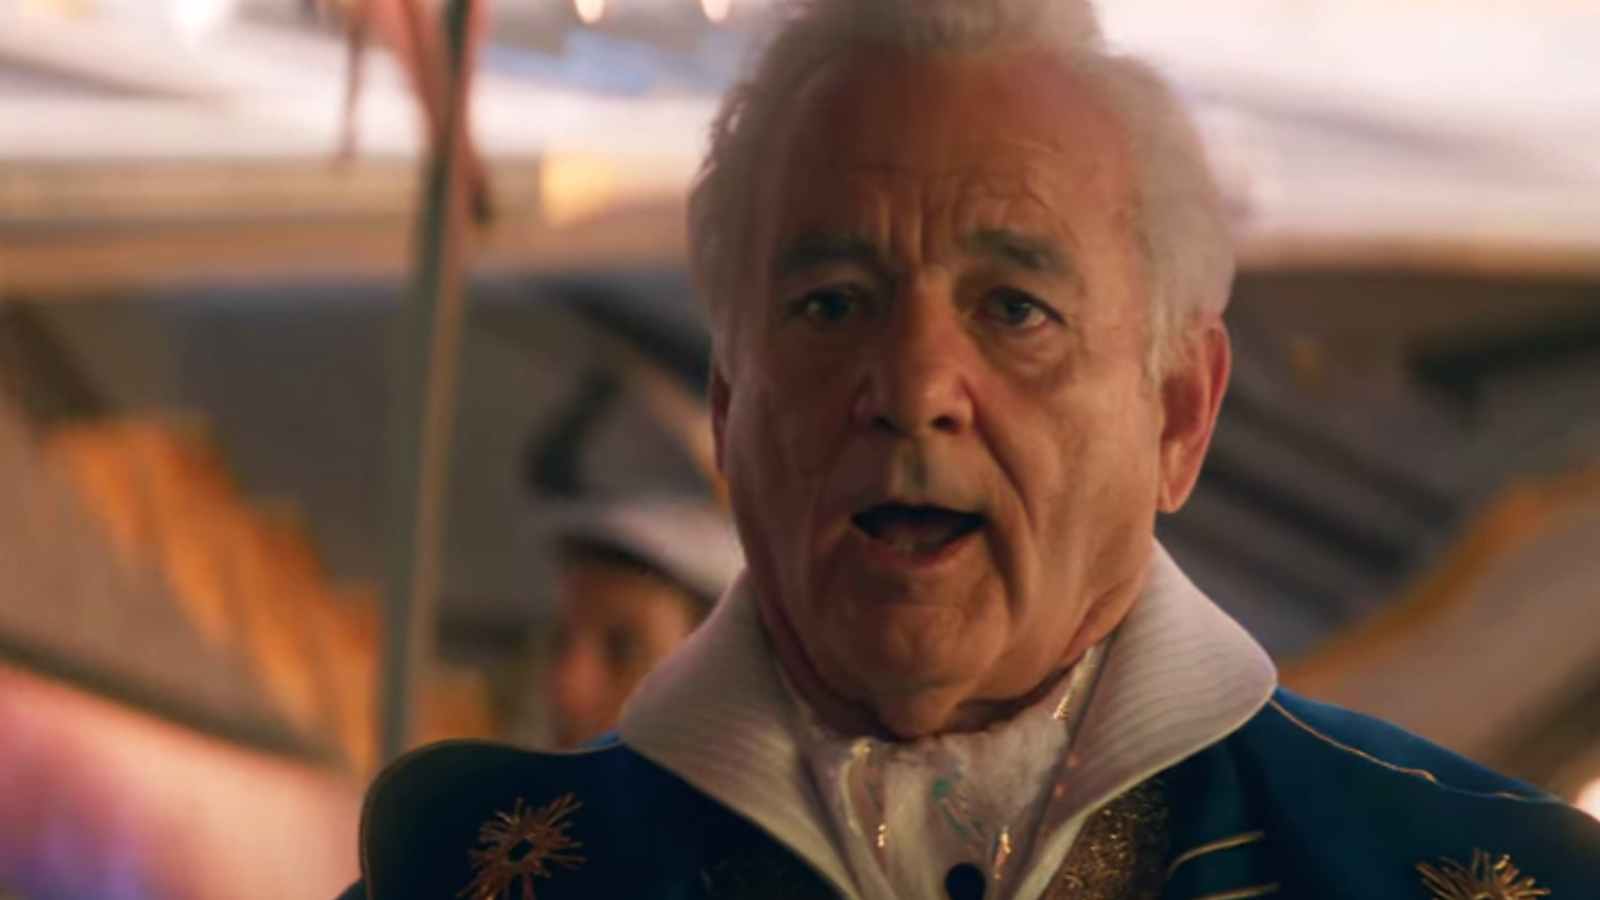 Bill Murray Net Worth (2023) From Ghostbusters, Quantumania